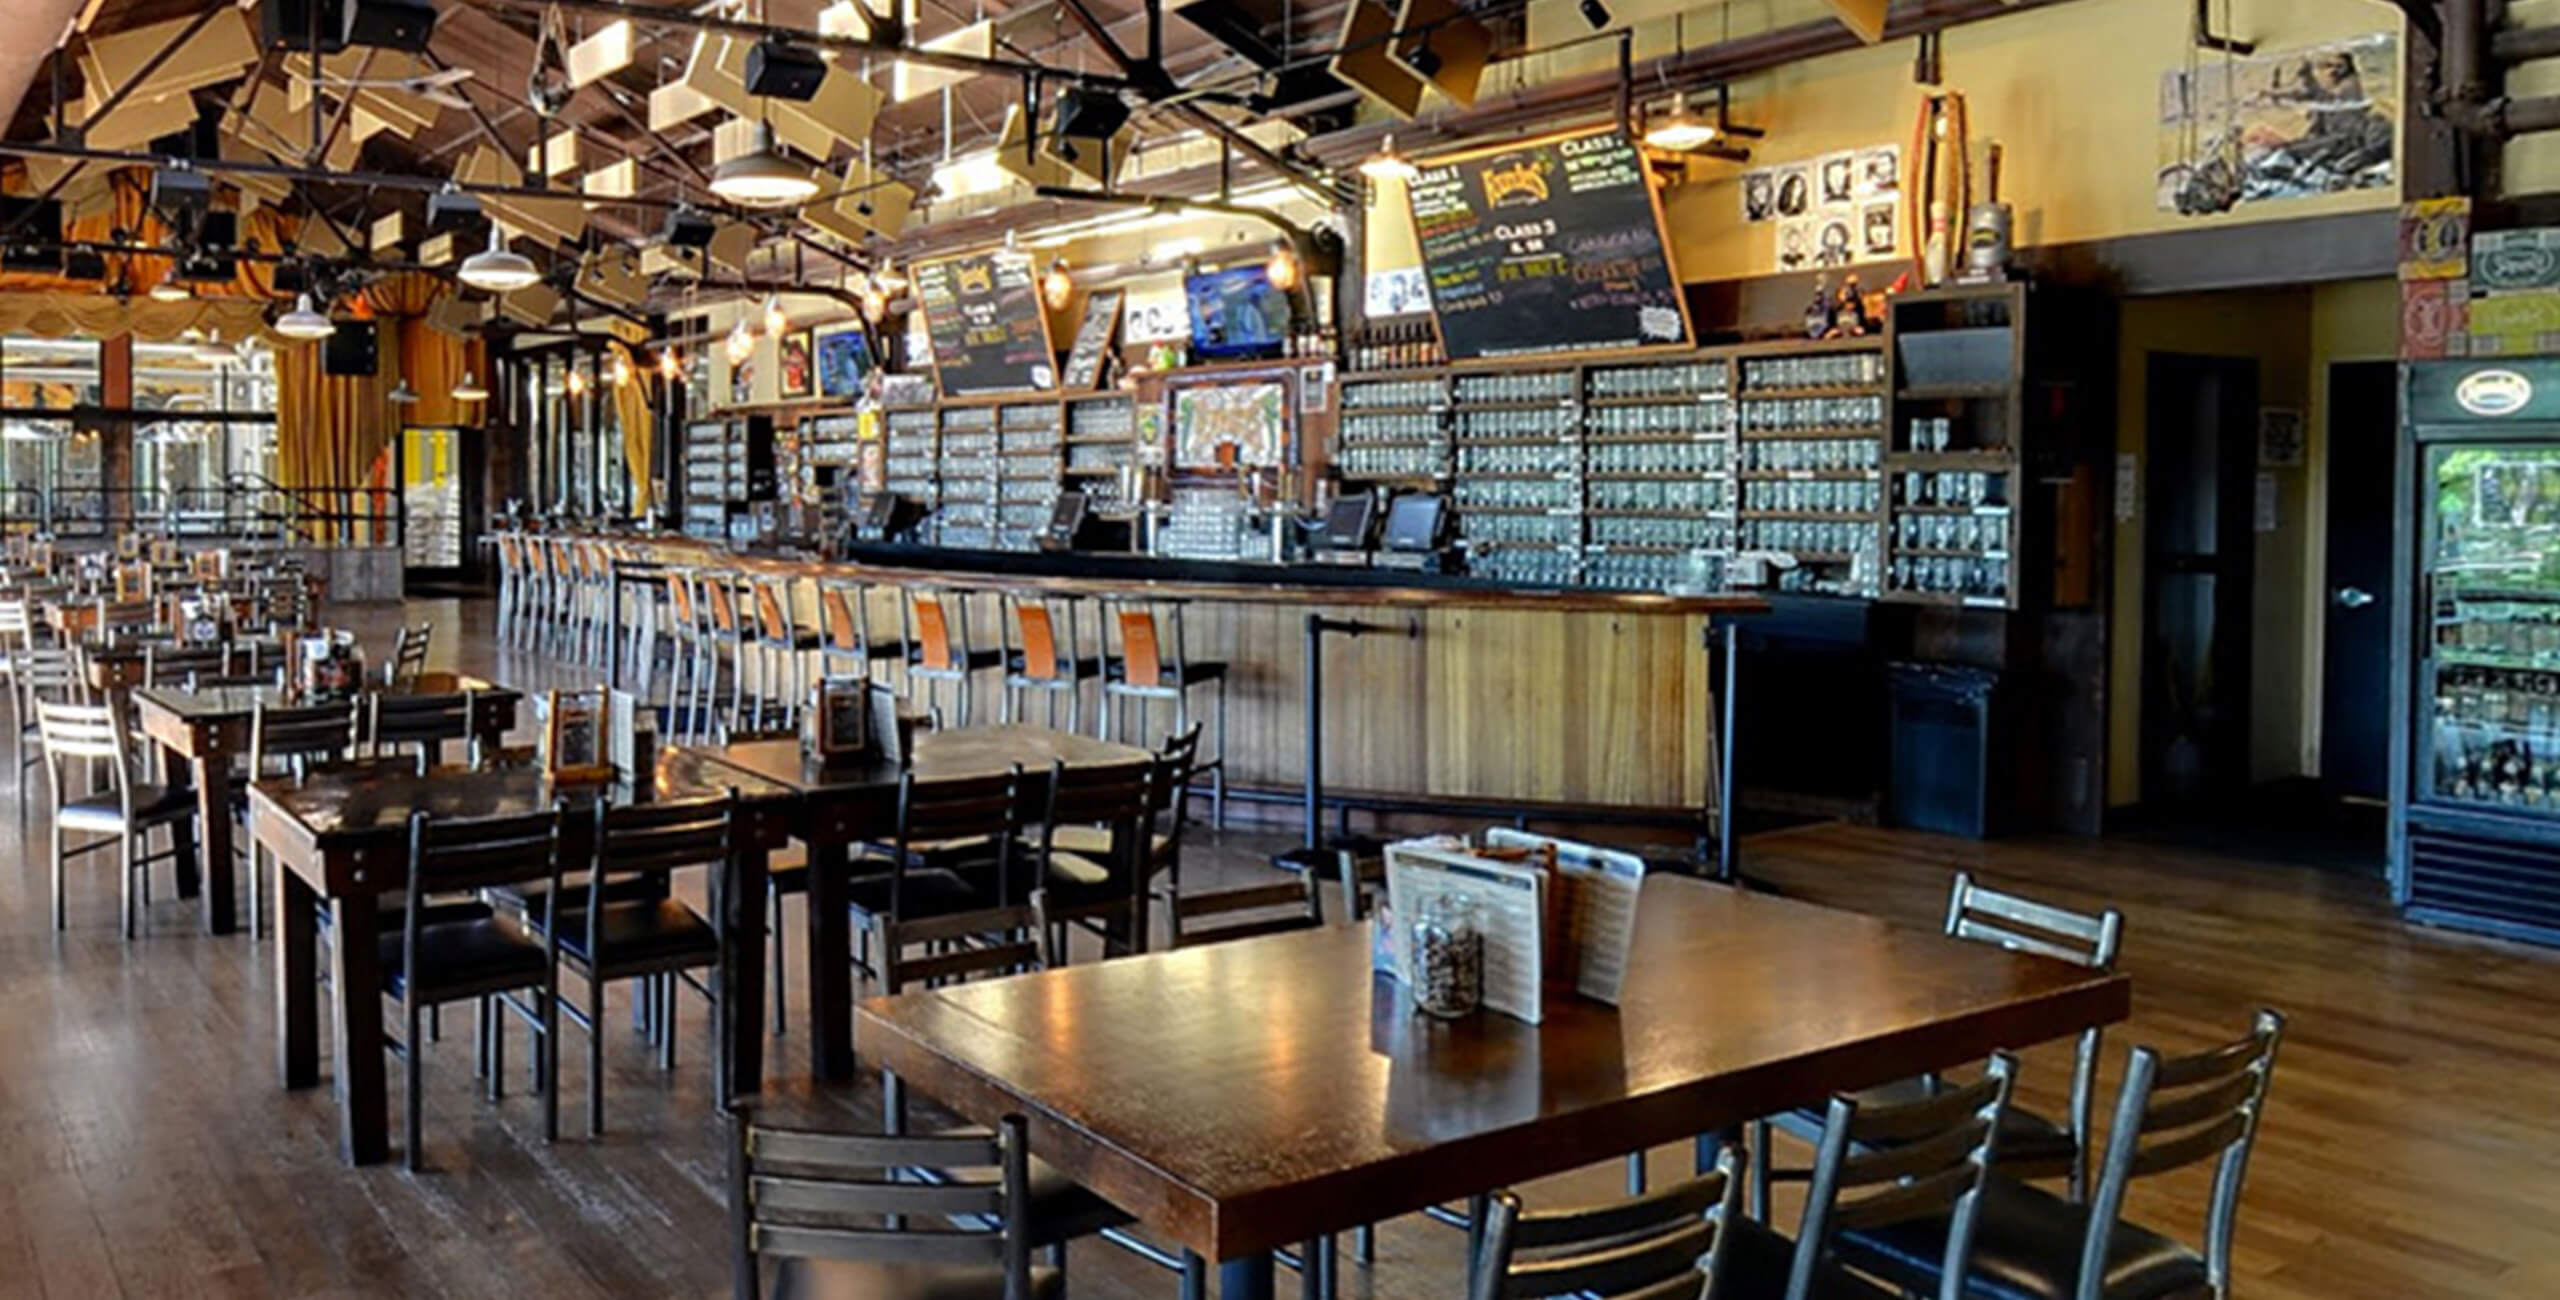 Image of inside Founders Brewing taproom